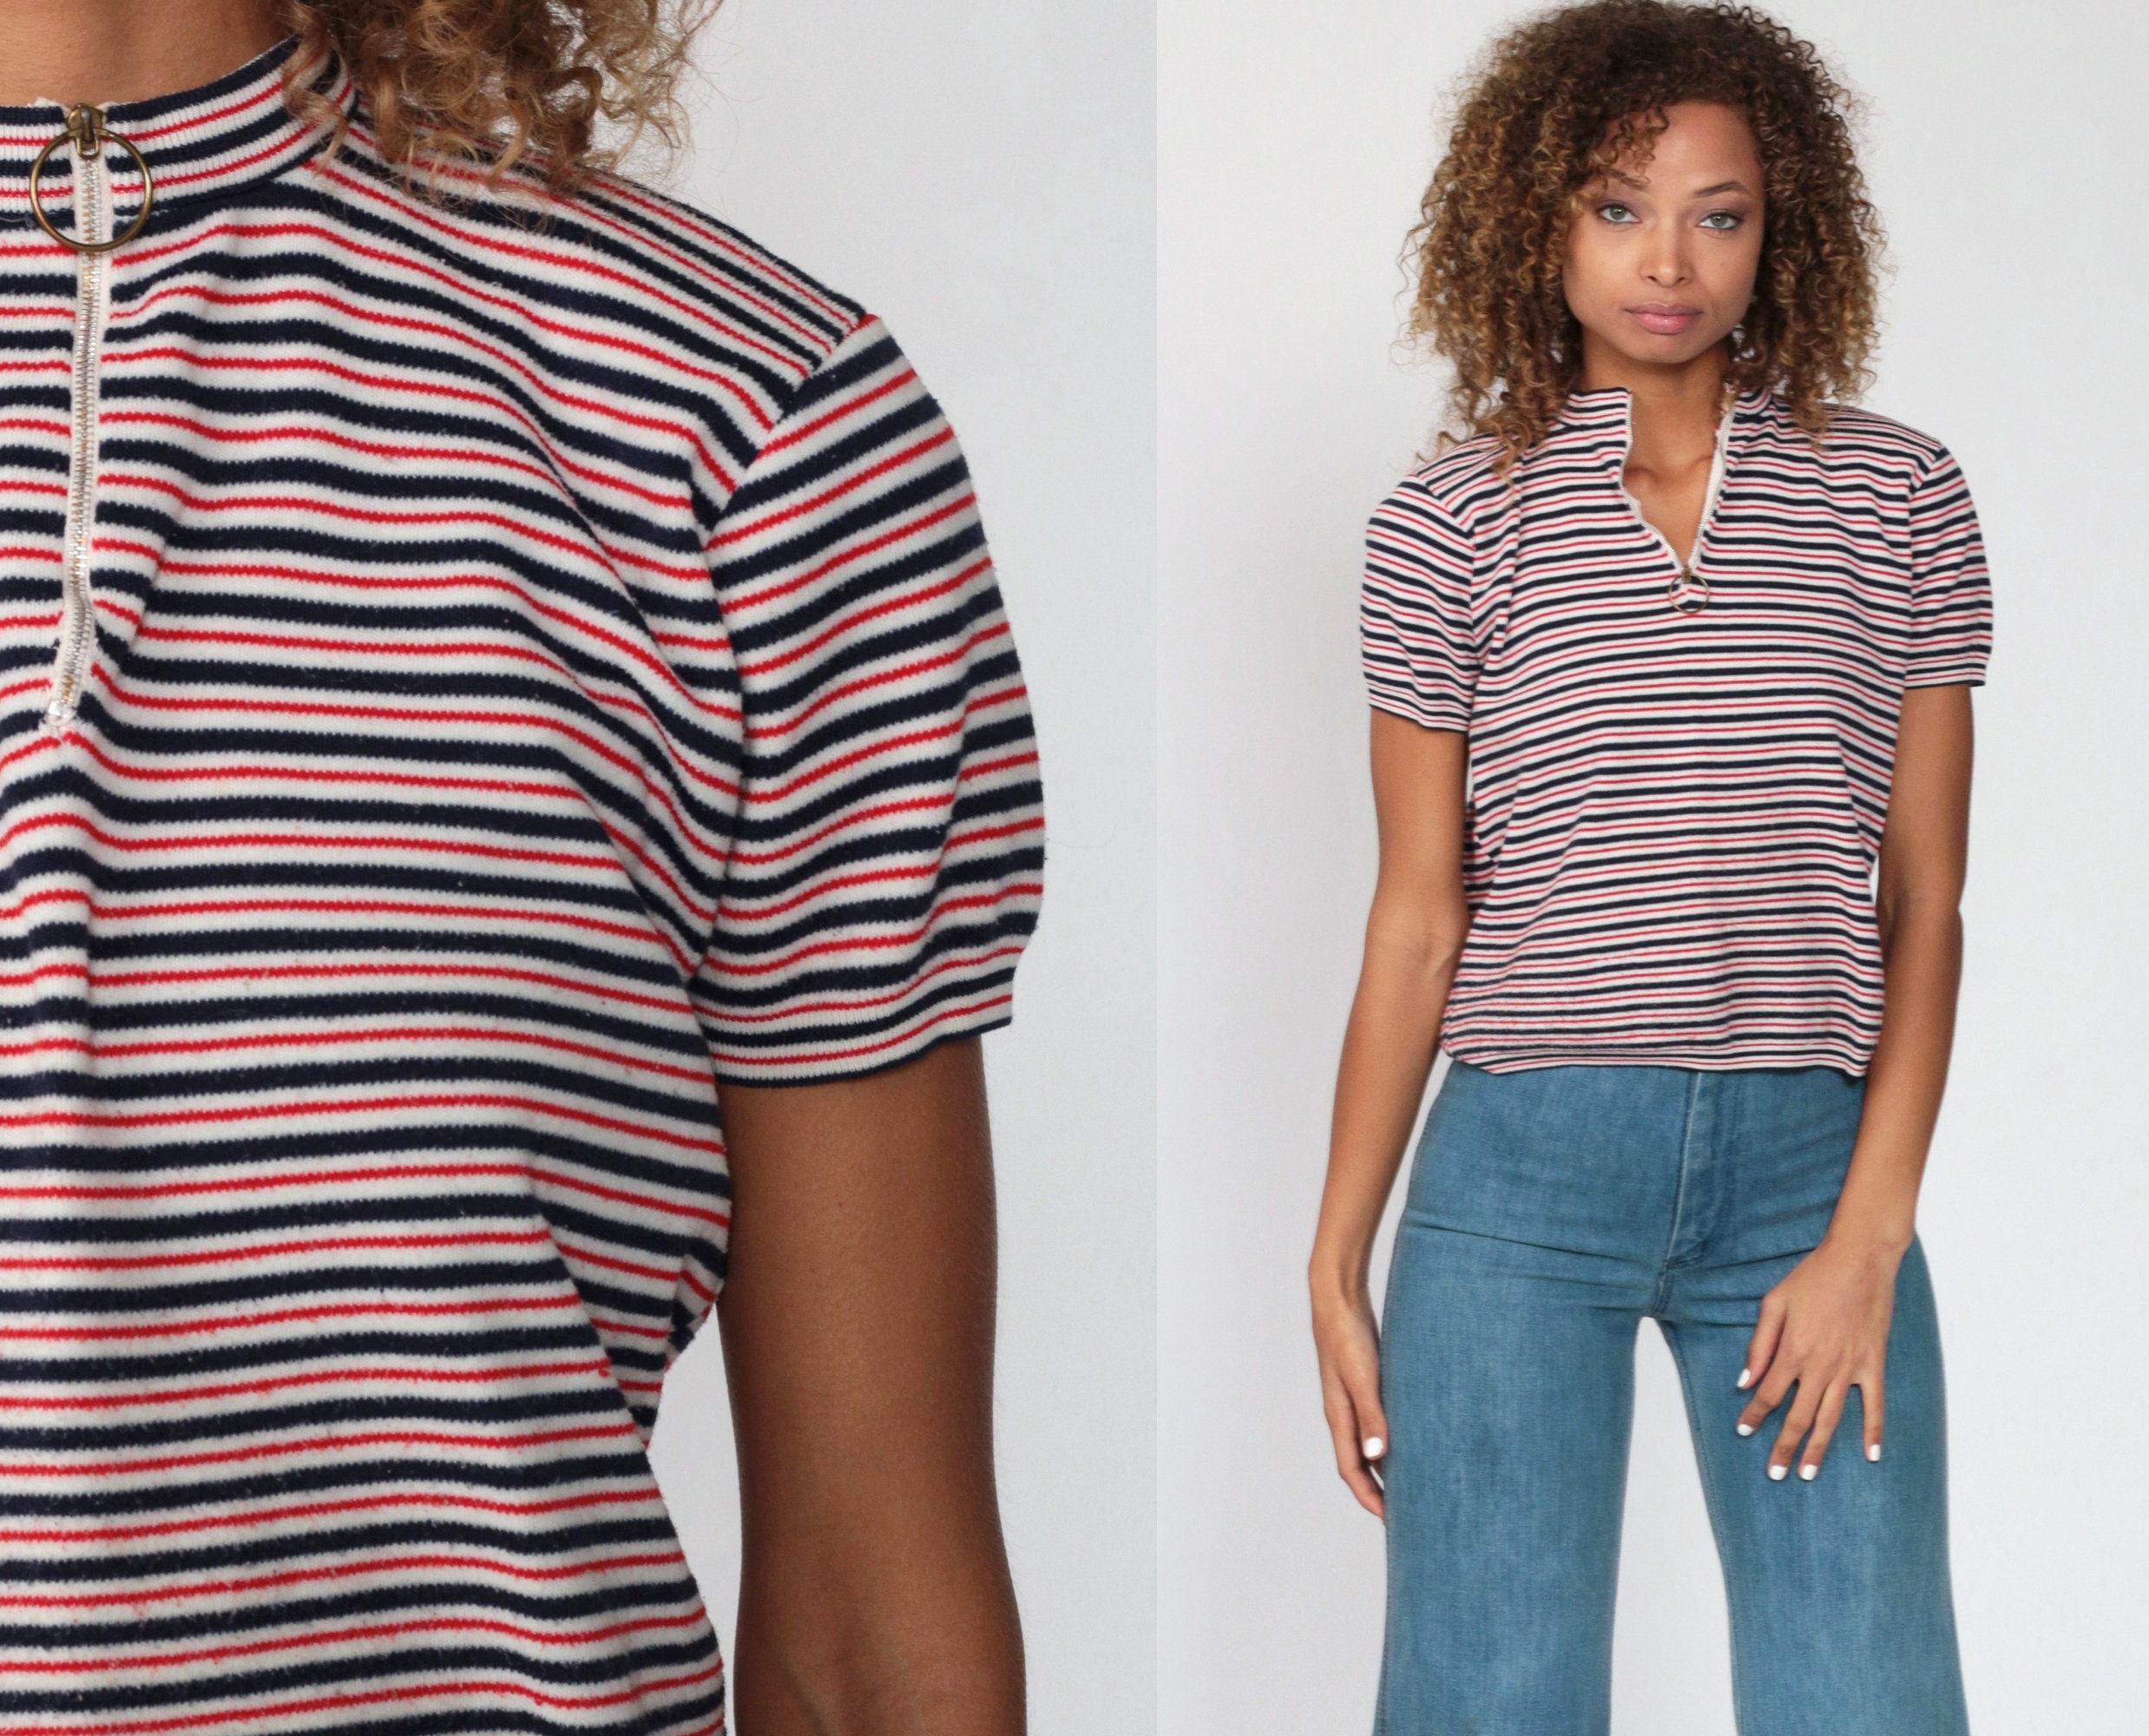 Ring Pull Shirt Striped Shirt 70s Mod Top ZIP UP Red Blue White Stripe ...